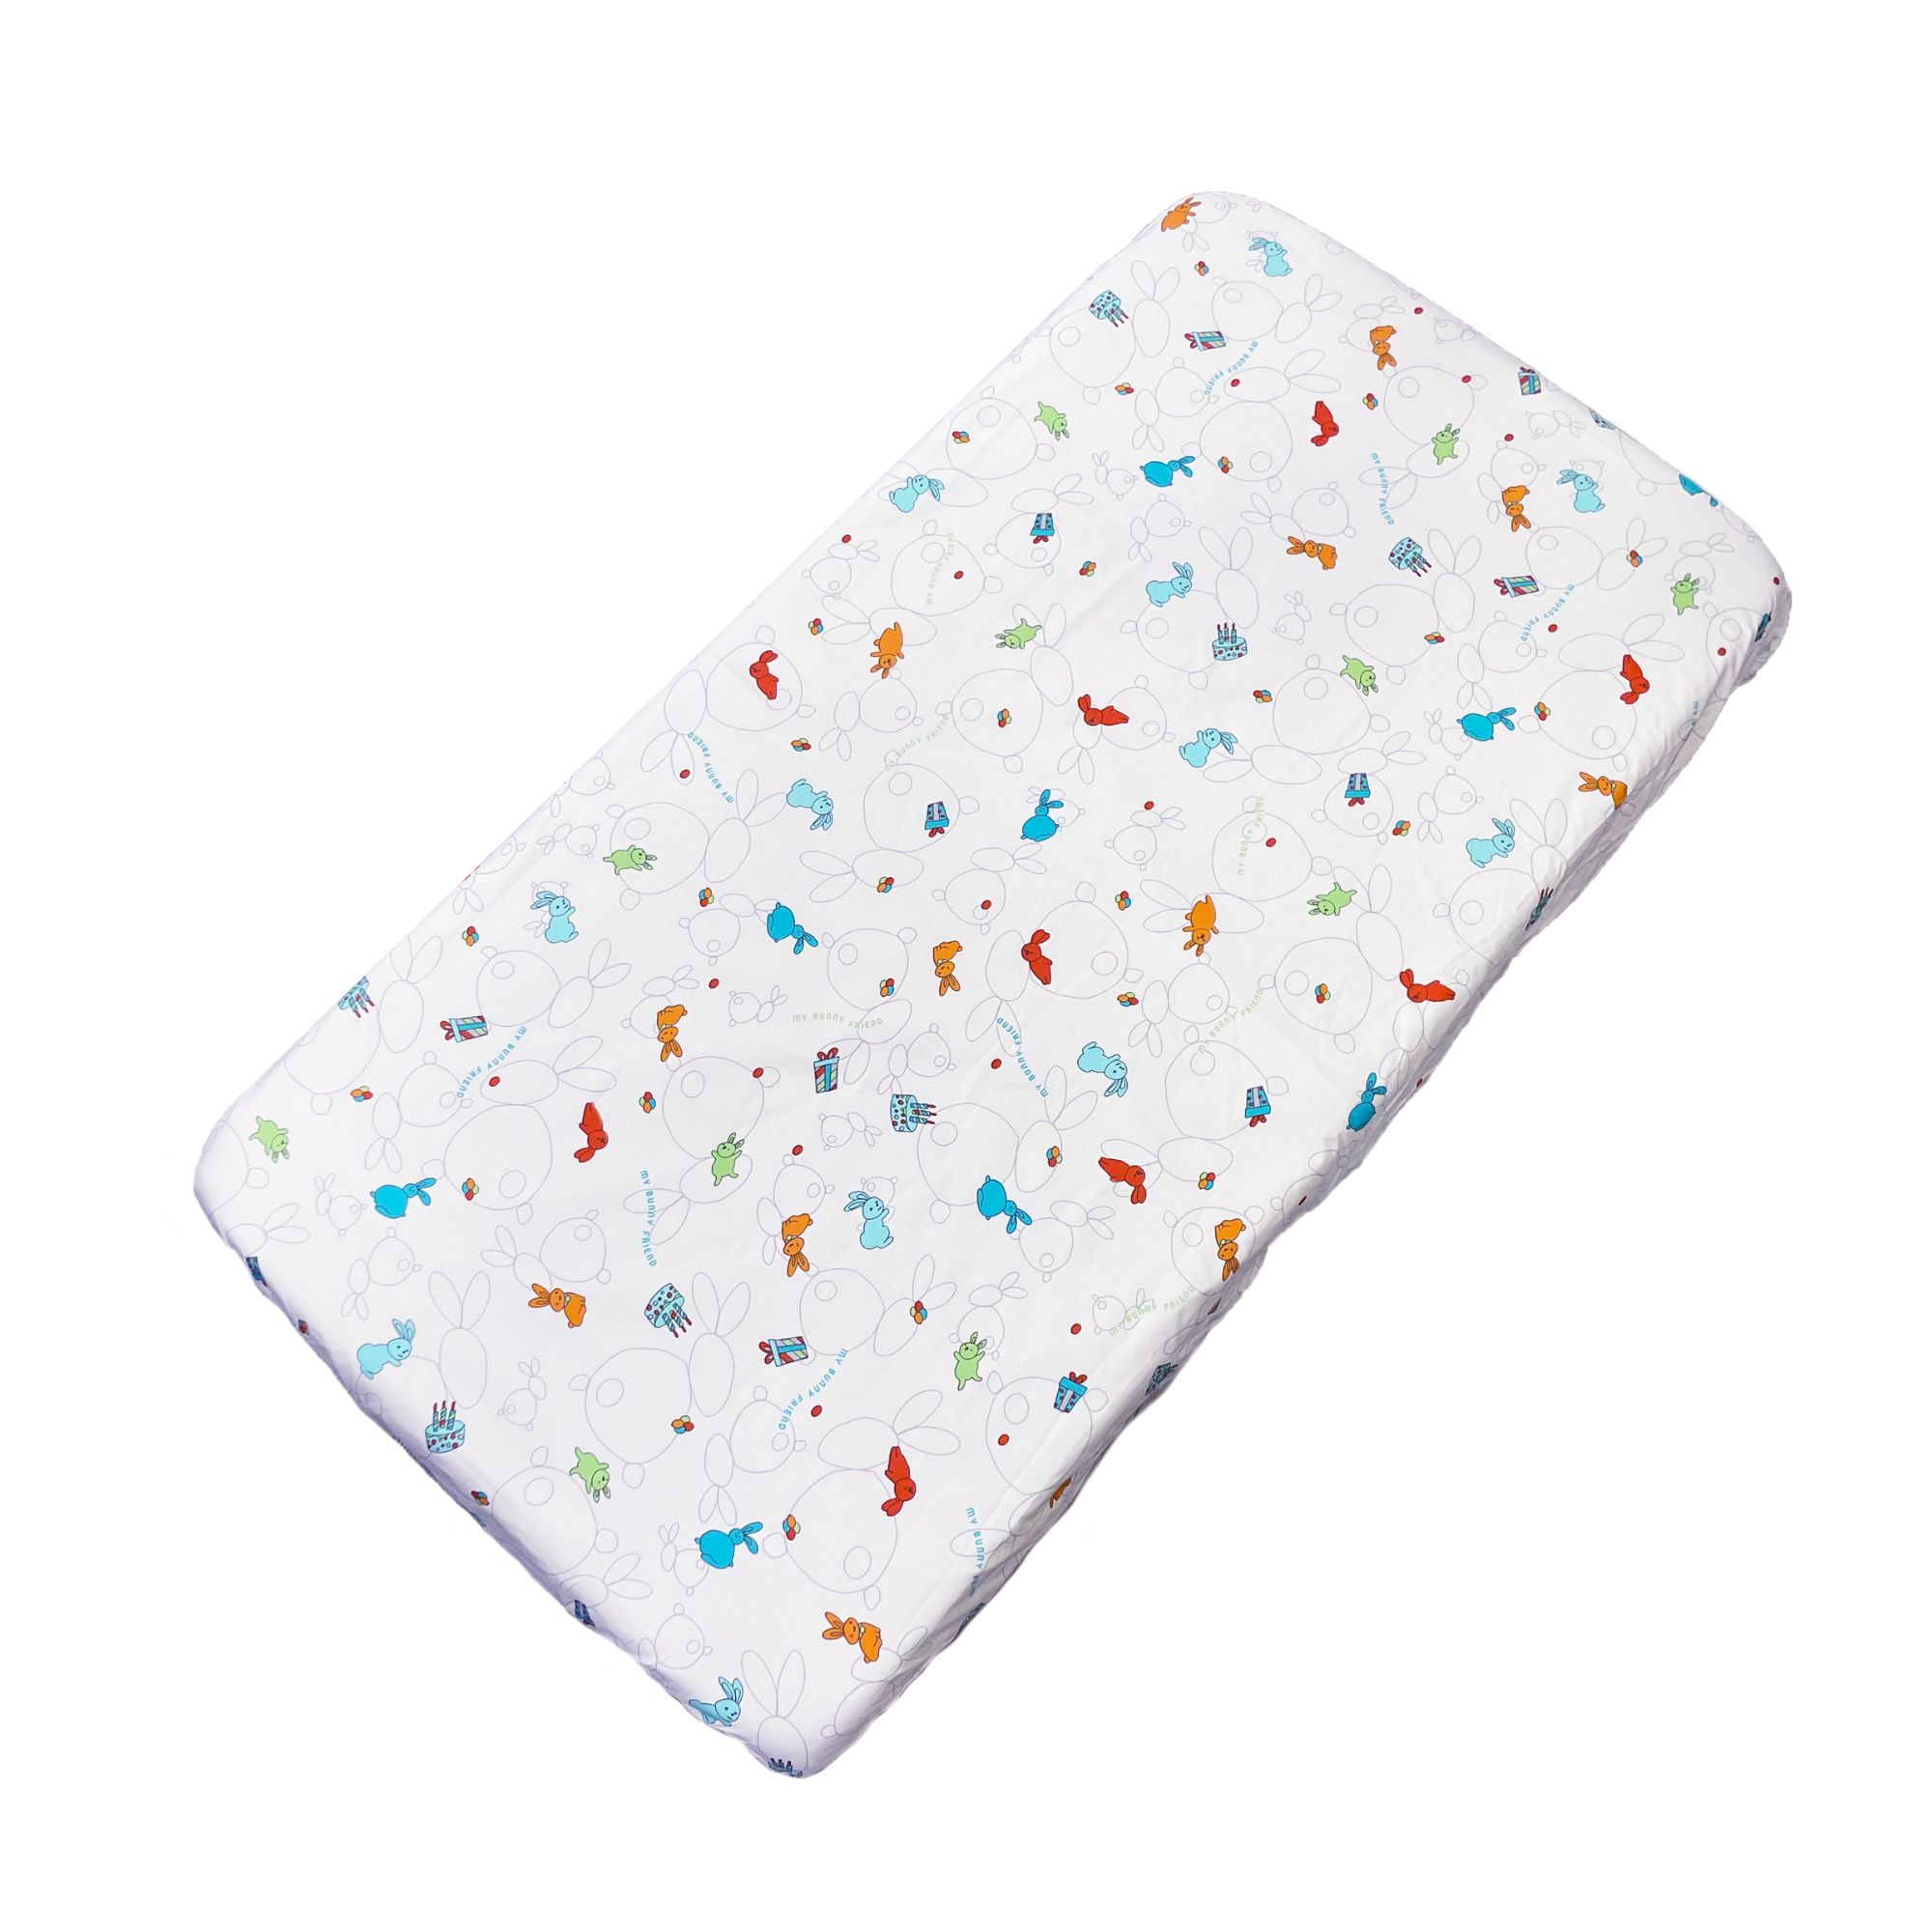 My Bunny Friend Fitted Sheet For Baby Mattress (71x132cm) - Bunny Party